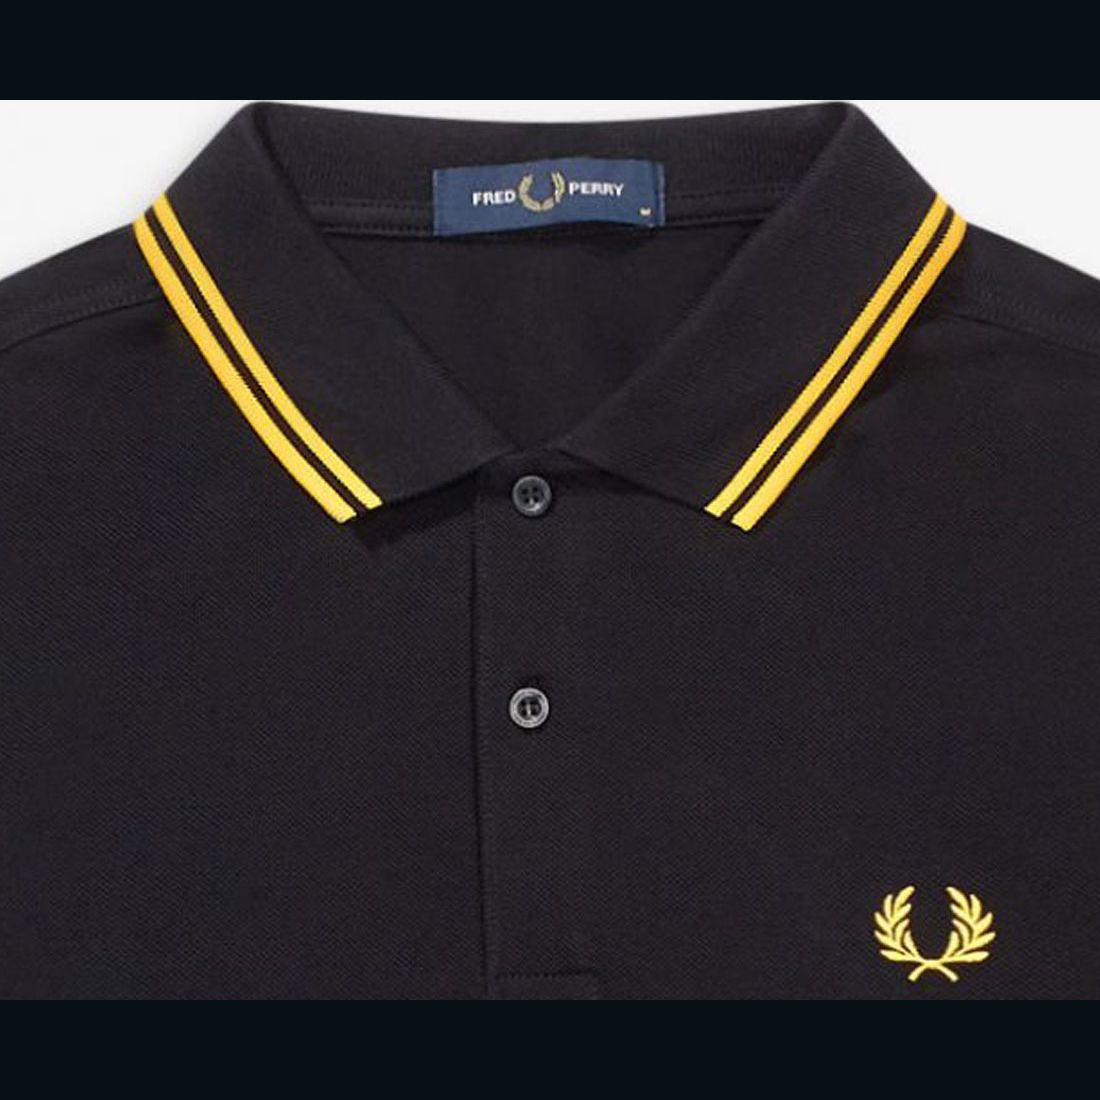 Officier tetraëder Marco Polo Fred Perry stops selling polo shirt associated with the 'Proud Boys' | CNN  Business